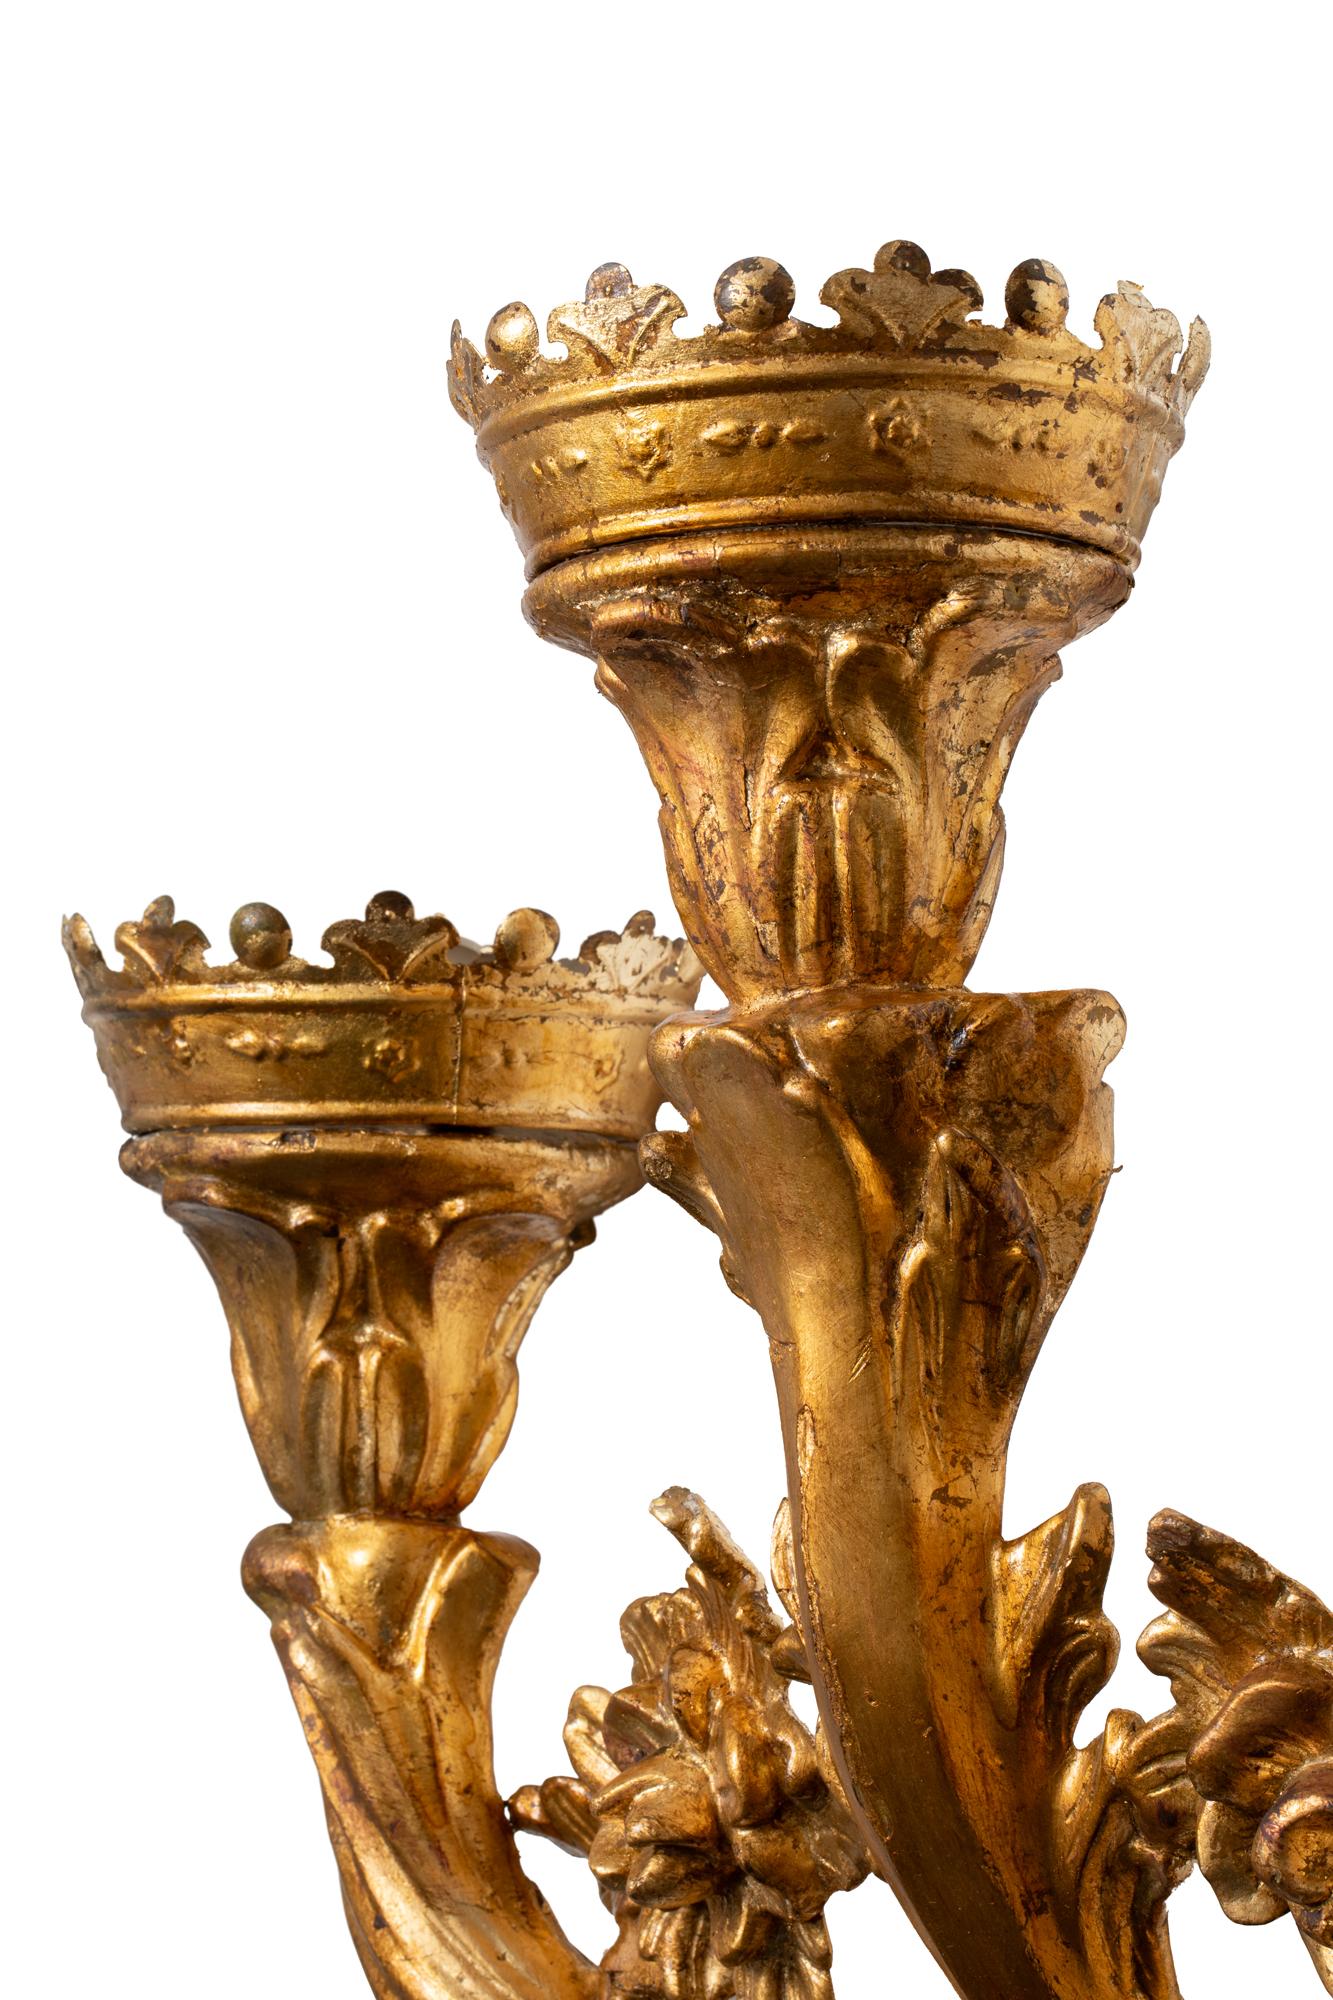 XVIII Century Pair of Touchers in Gilt Woodwork Converted in Lighting Appliqués

Carved and gilded wood touchers from XVIII century Spain are exquisite examples of craftsmanship and artistic flair characteristic of the Baroque and Rococo periods.